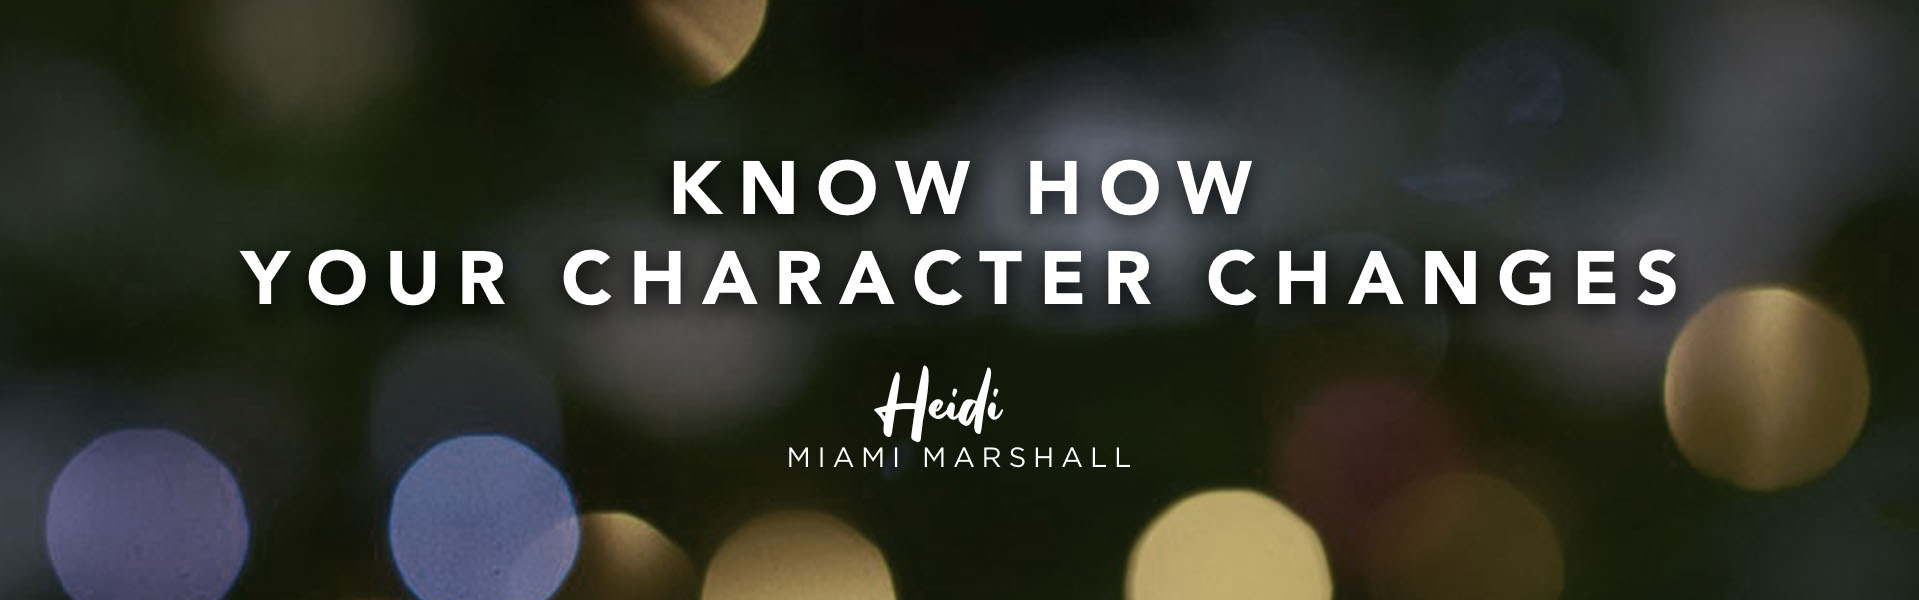 Acting coach Heidi Marshall says, Know how your character changes